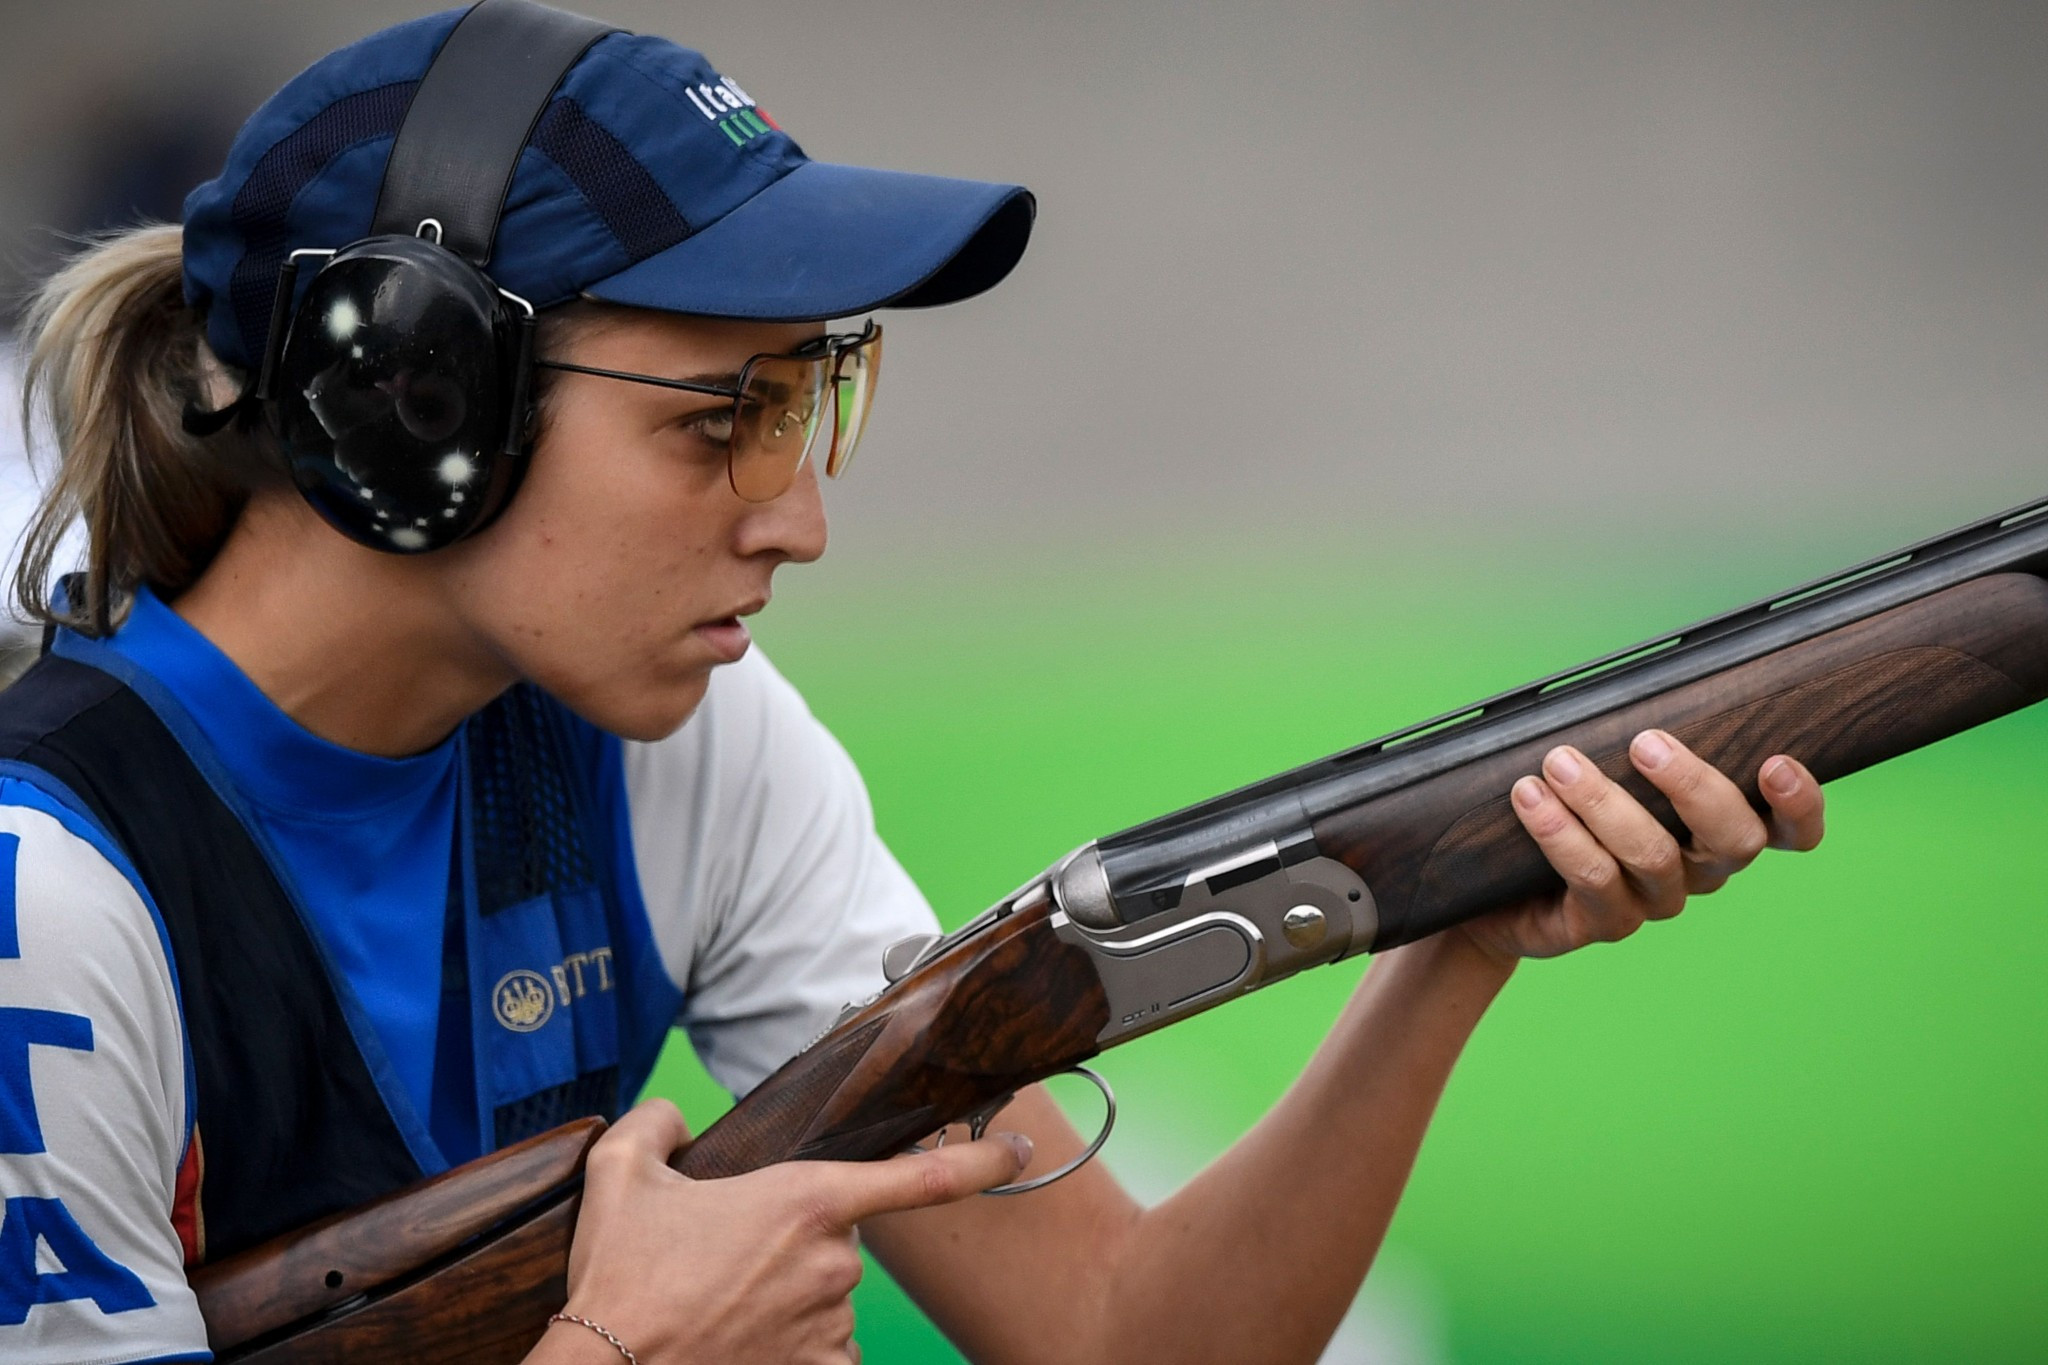 Italy's Jessica Rossi led the way in the women's trap qualification ©Getty Images